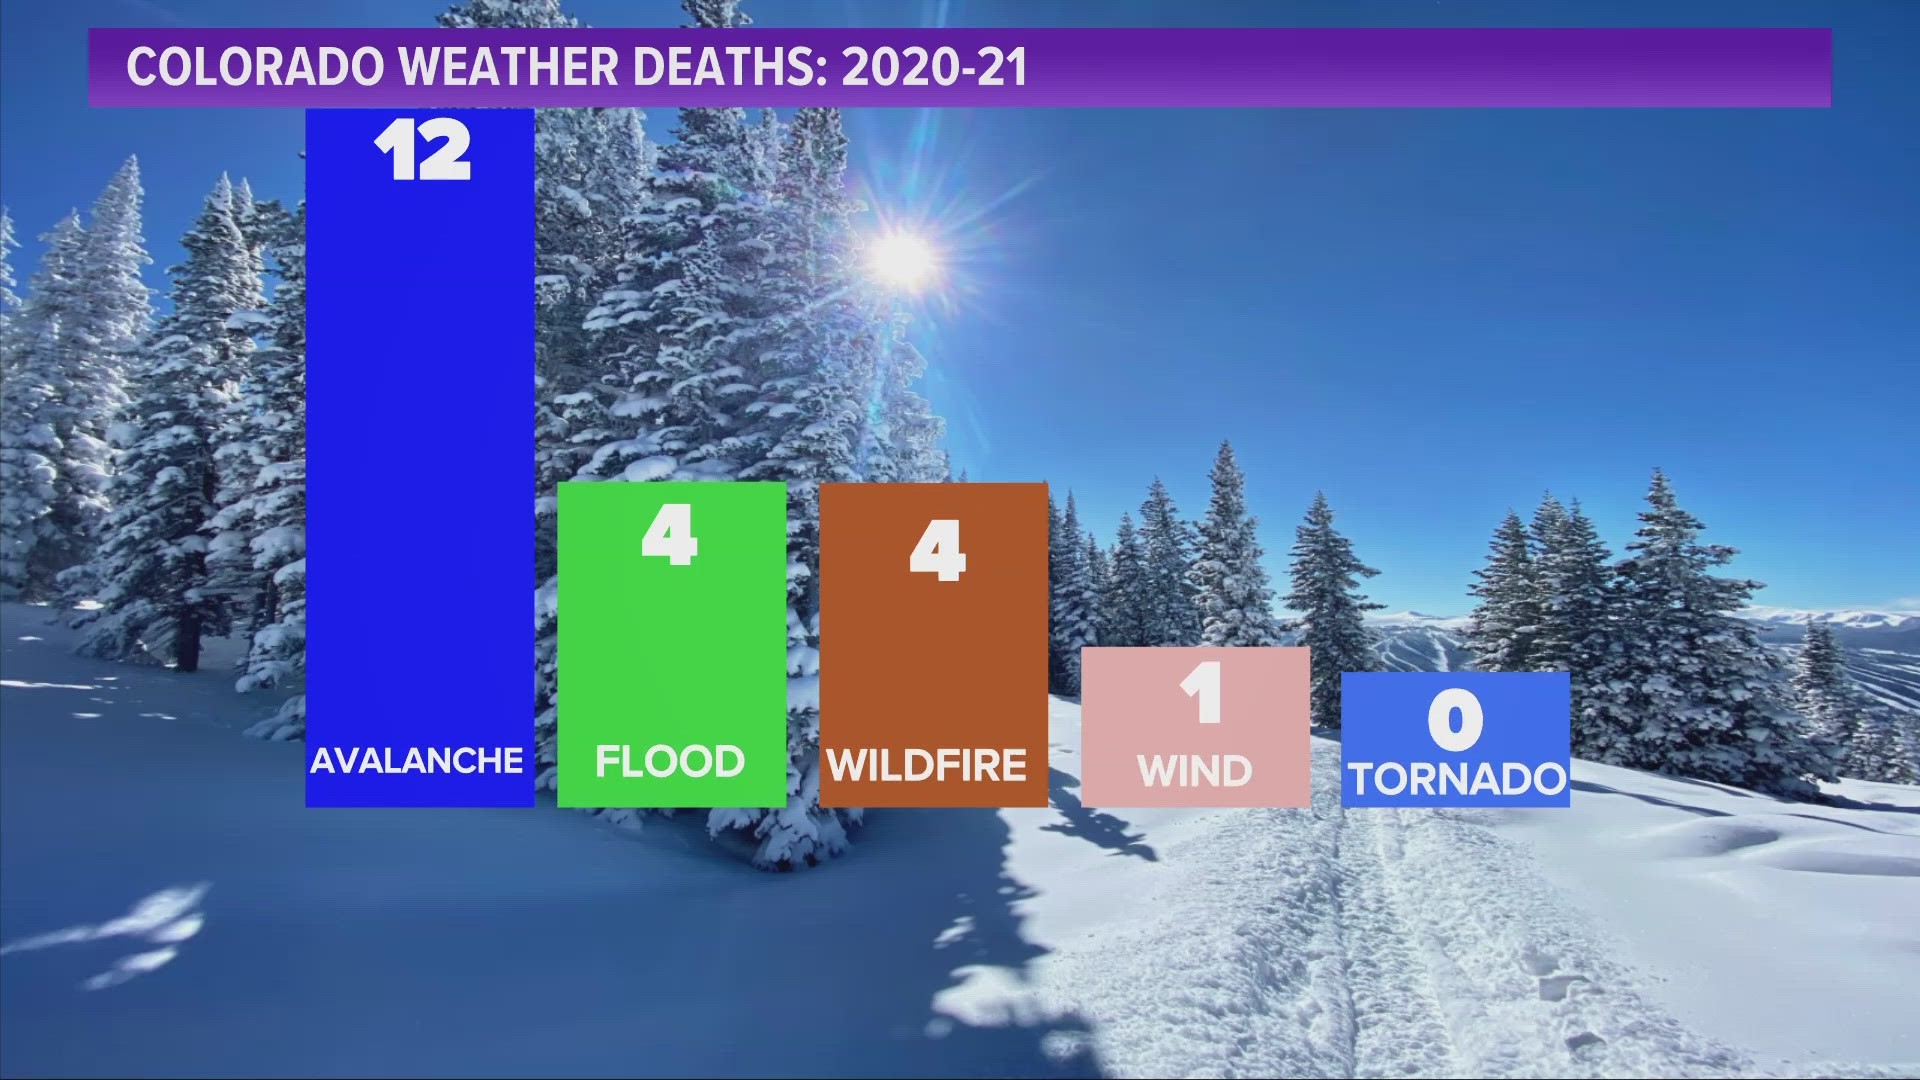 This week could bring parts of the mountains their highest avalanche danger so far this season. 9 people have died in avalanches so far this winter in Colorado.